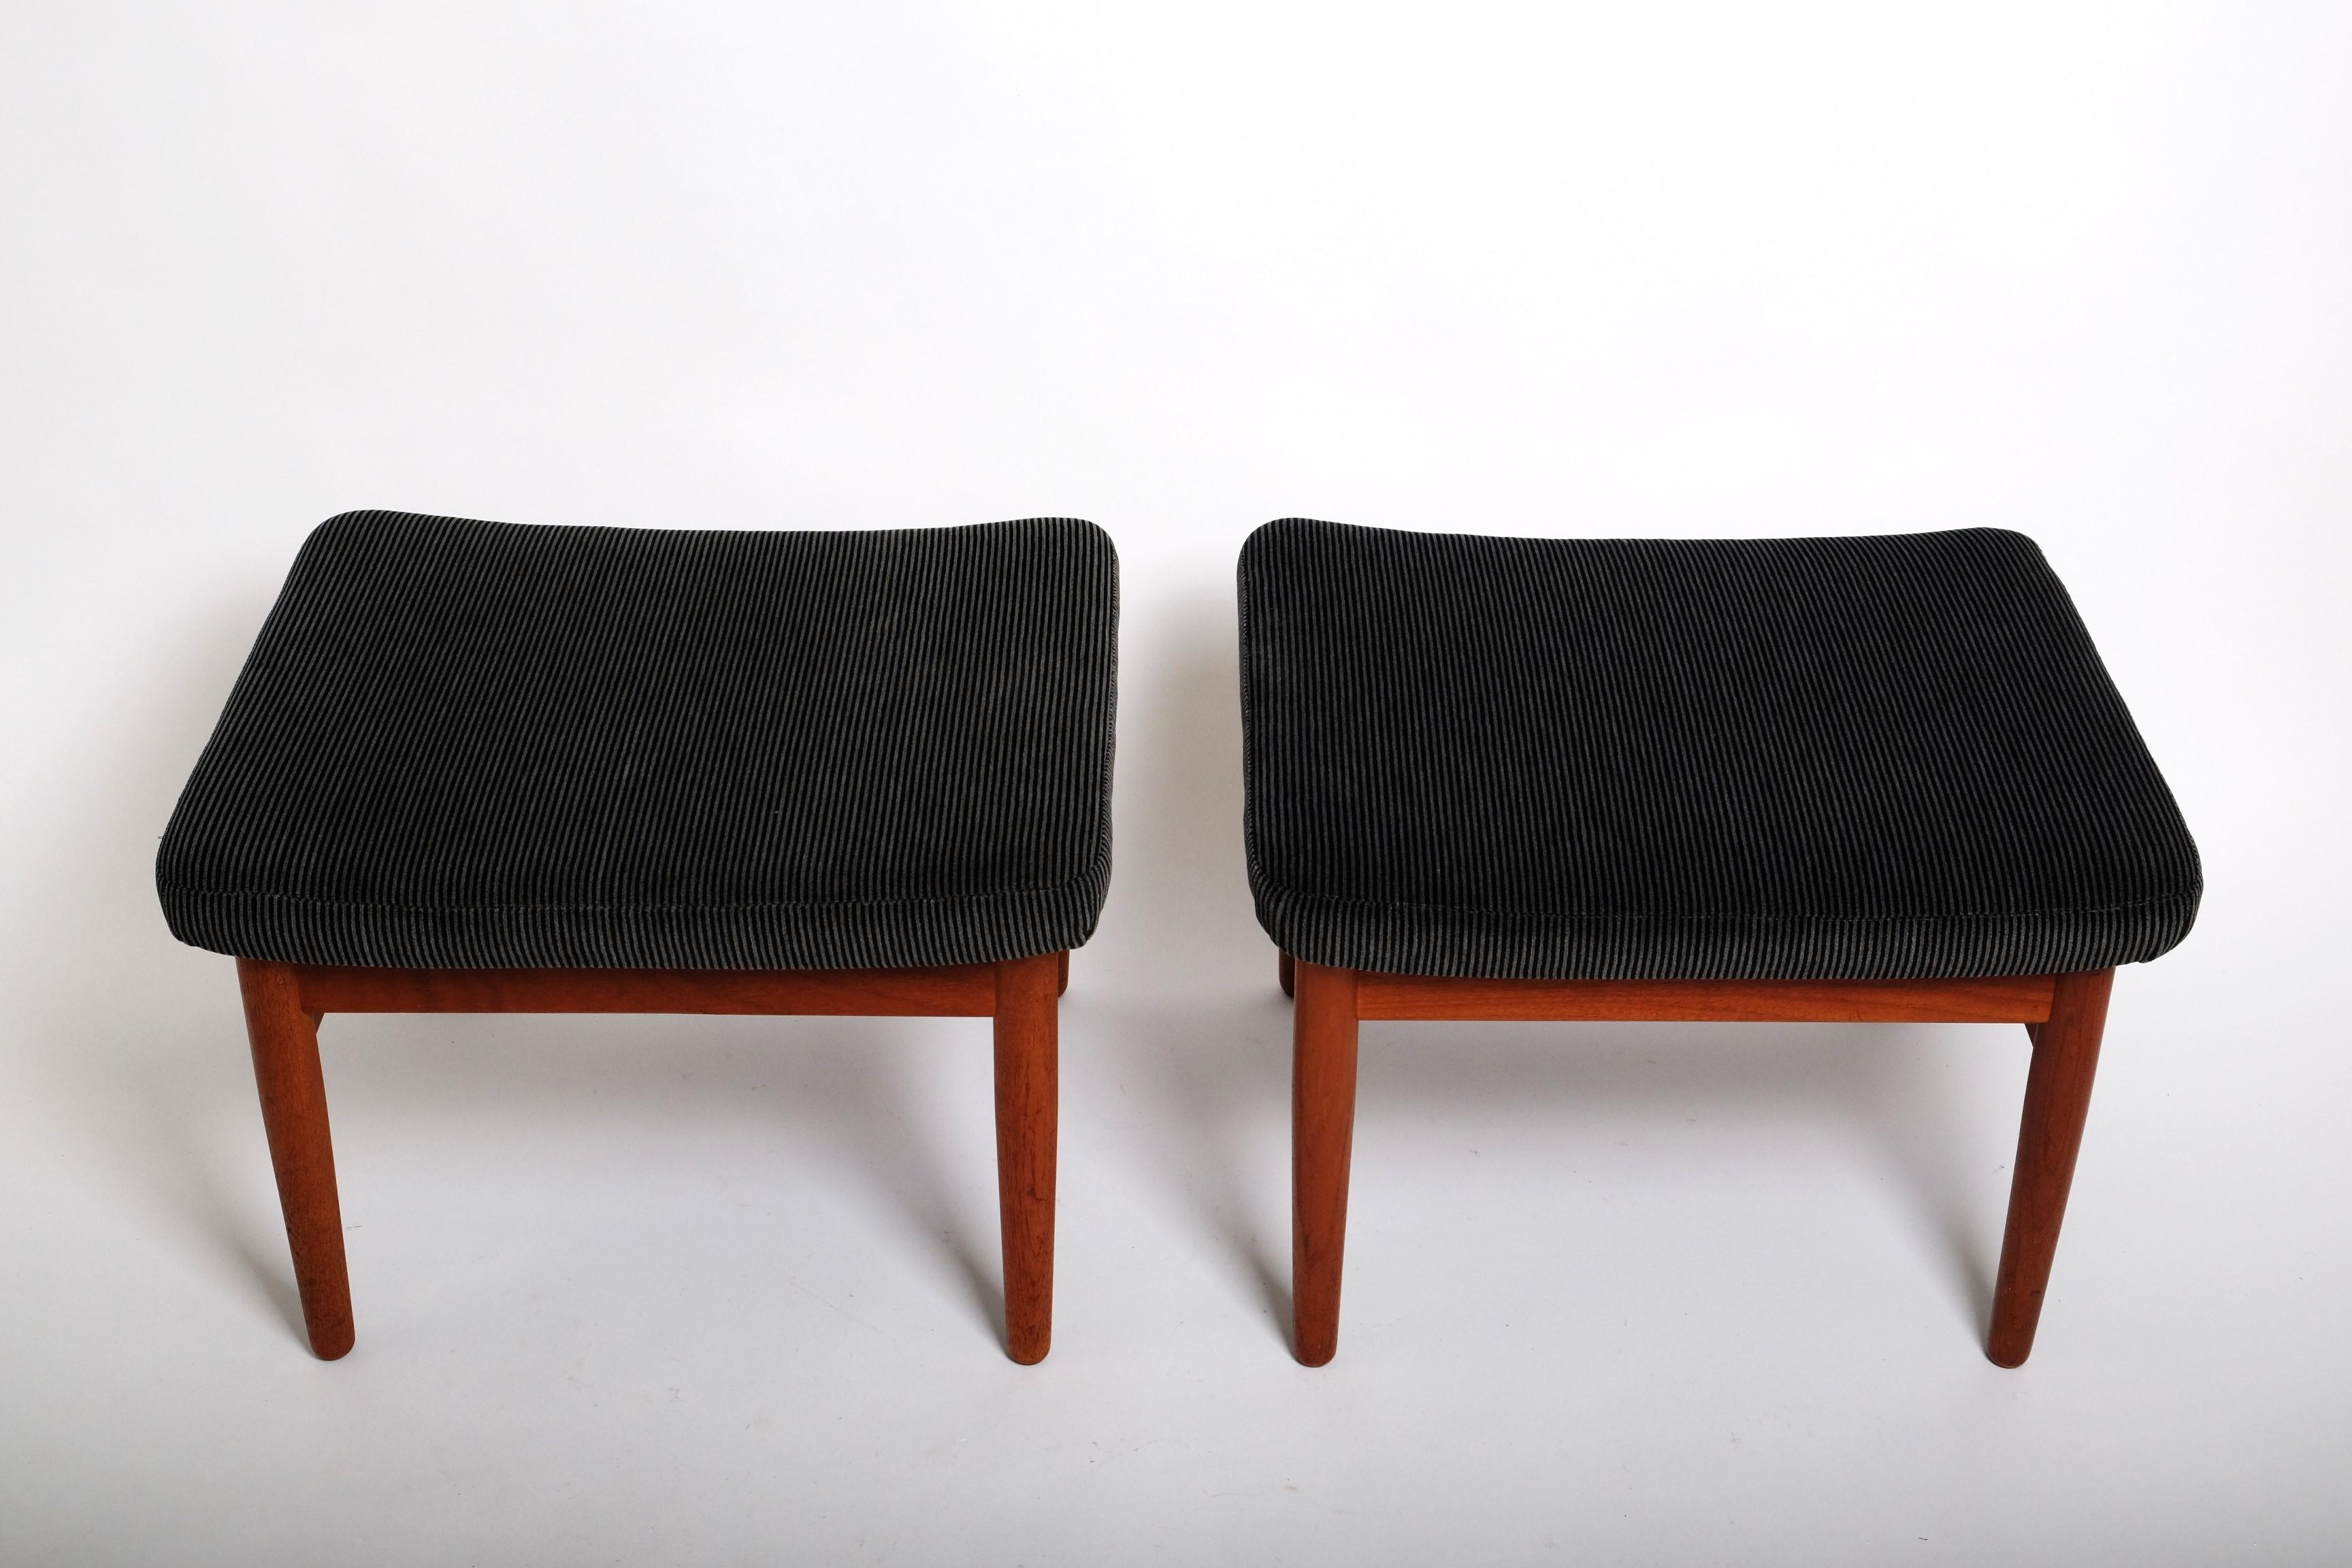 Two Mid-Century Stools by Arne Vodder FD164 Ottomans France & Son, Denmark 1960s For Sale 1